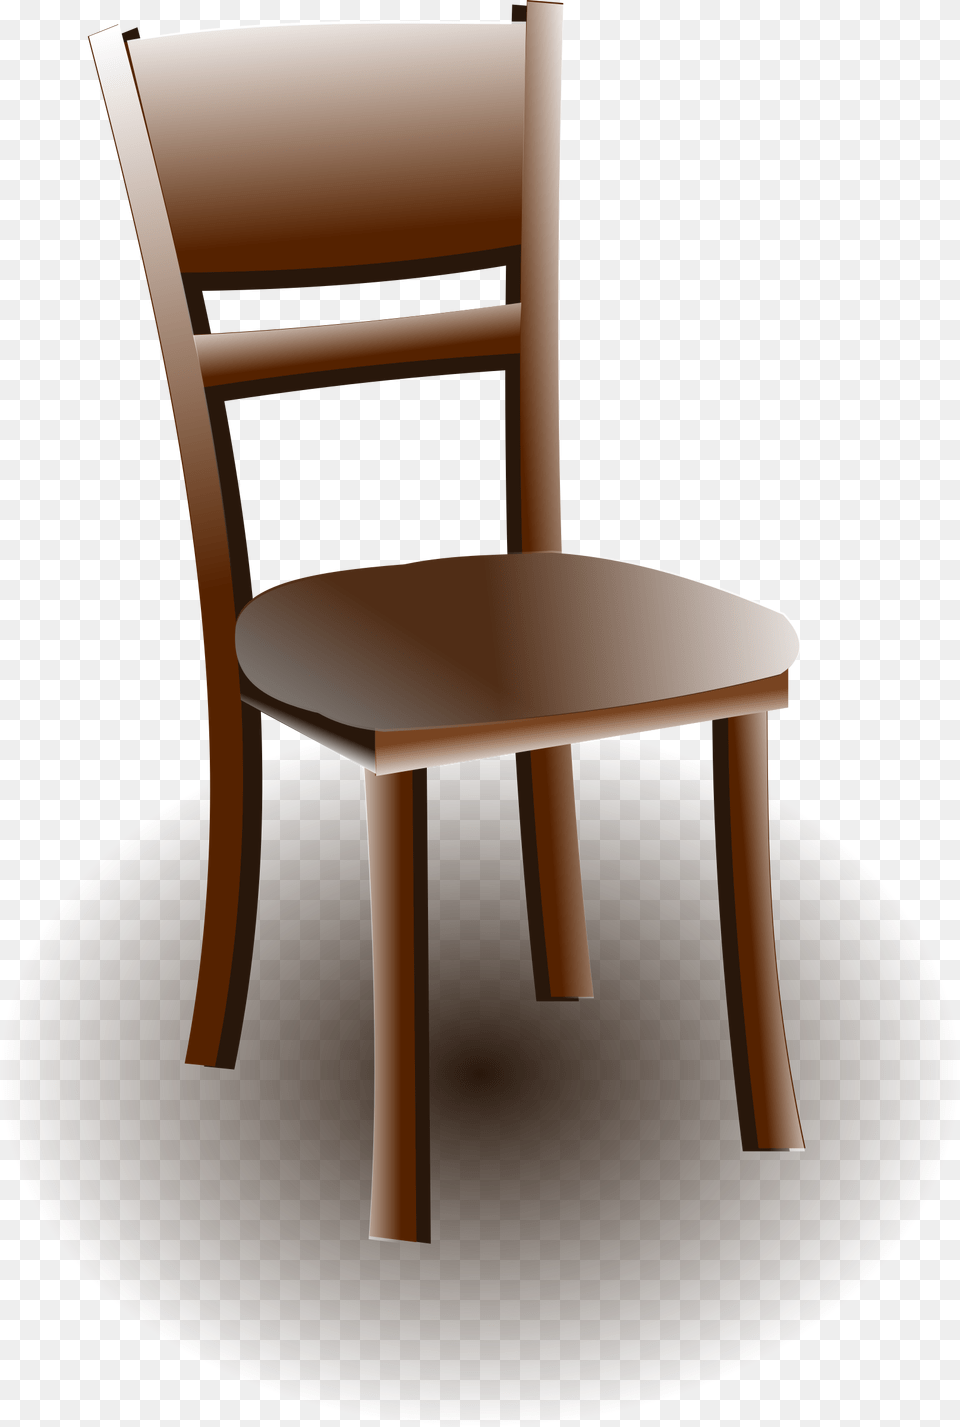 Wooden Chair Light Brown Chair Clipart Wooden Chair, Furniture Png Image